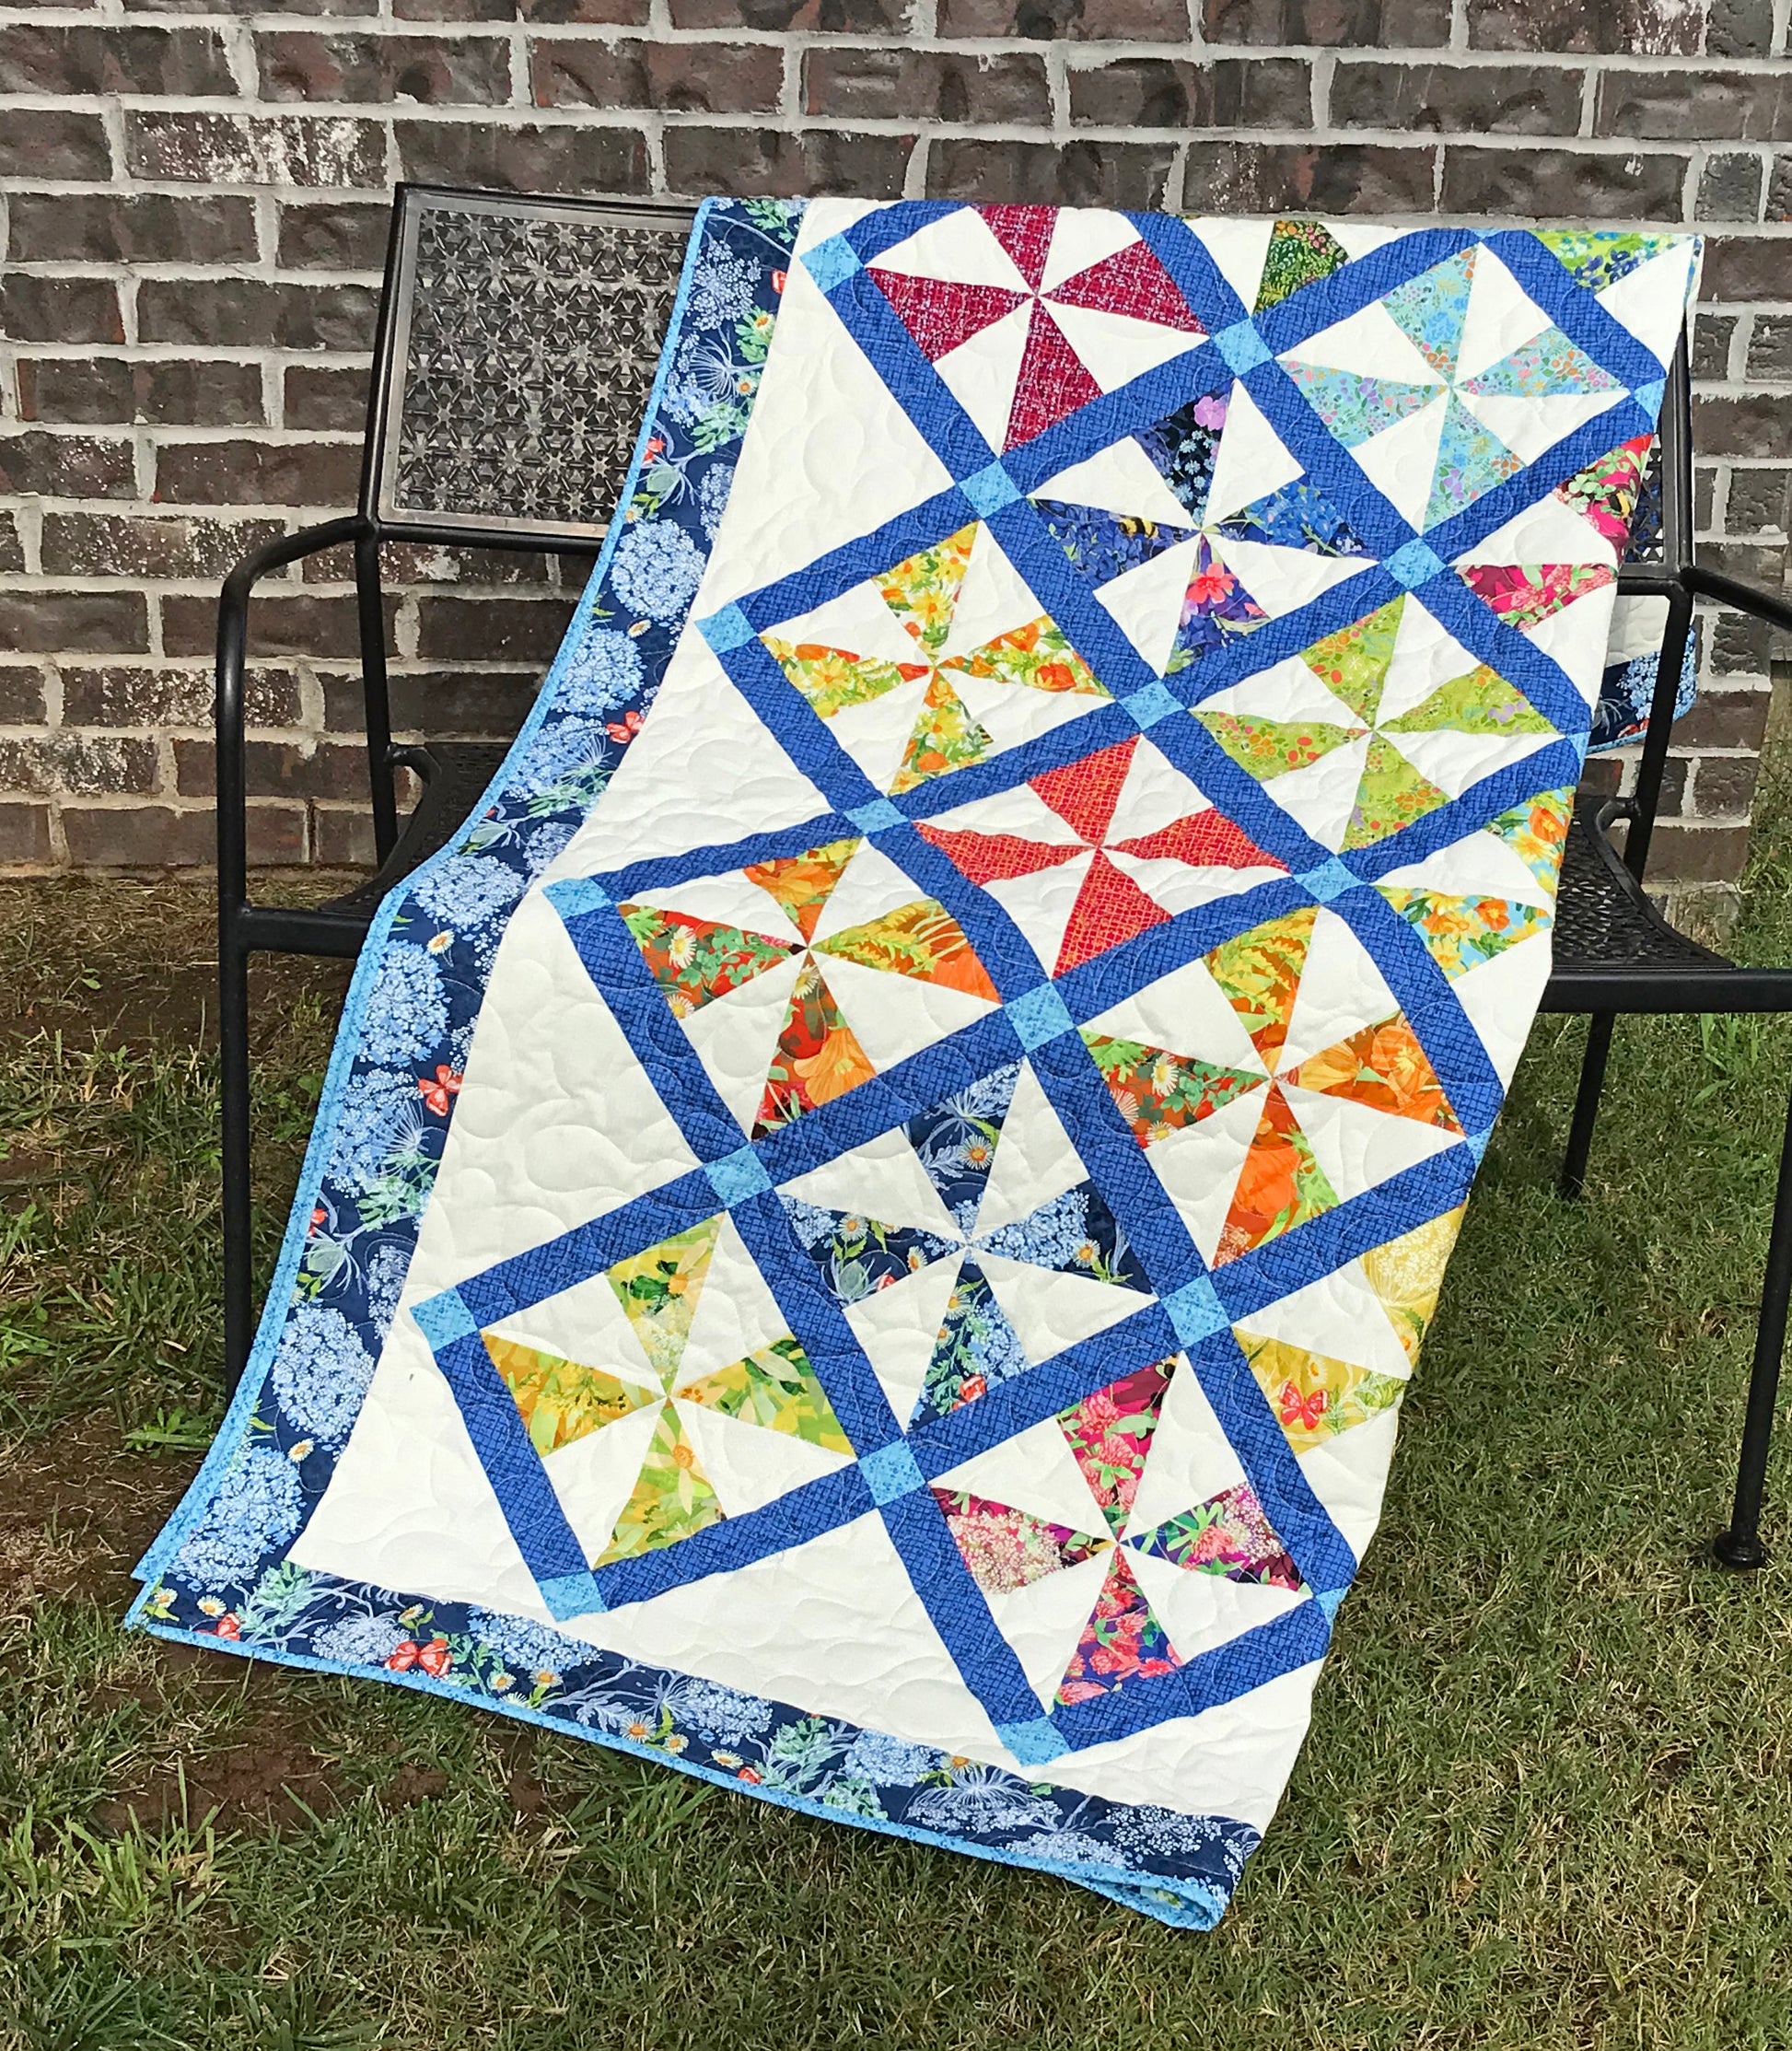 Pinwheel Parade quilt pattern featuring pinwheel blocks set on-point with sashing between the blocks and a floral border. Quilt is shown folded on a bench.